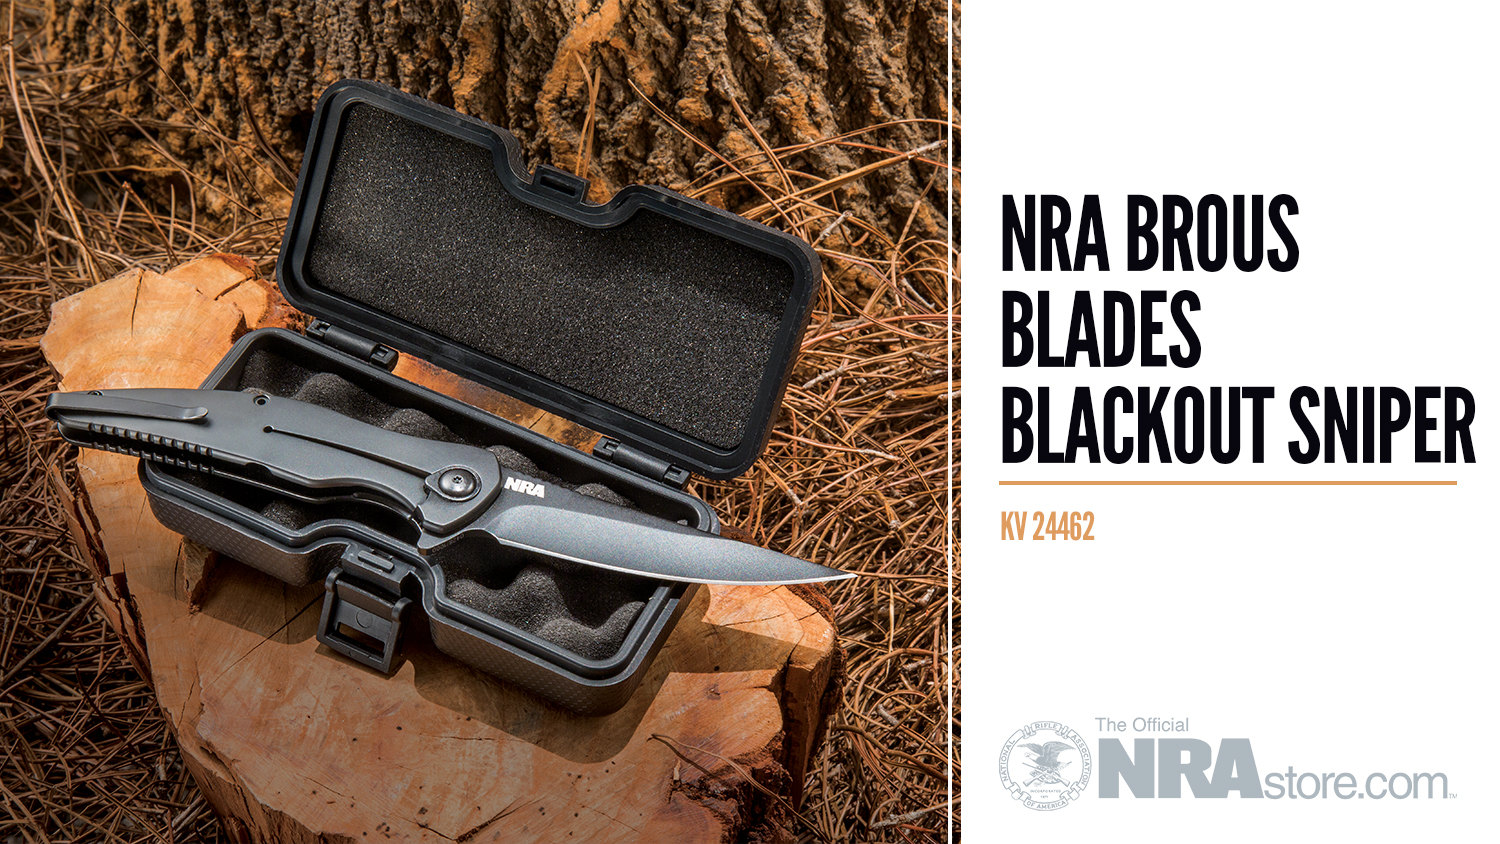 Product Highlight: NRA Brous Blades Blackout Sniper